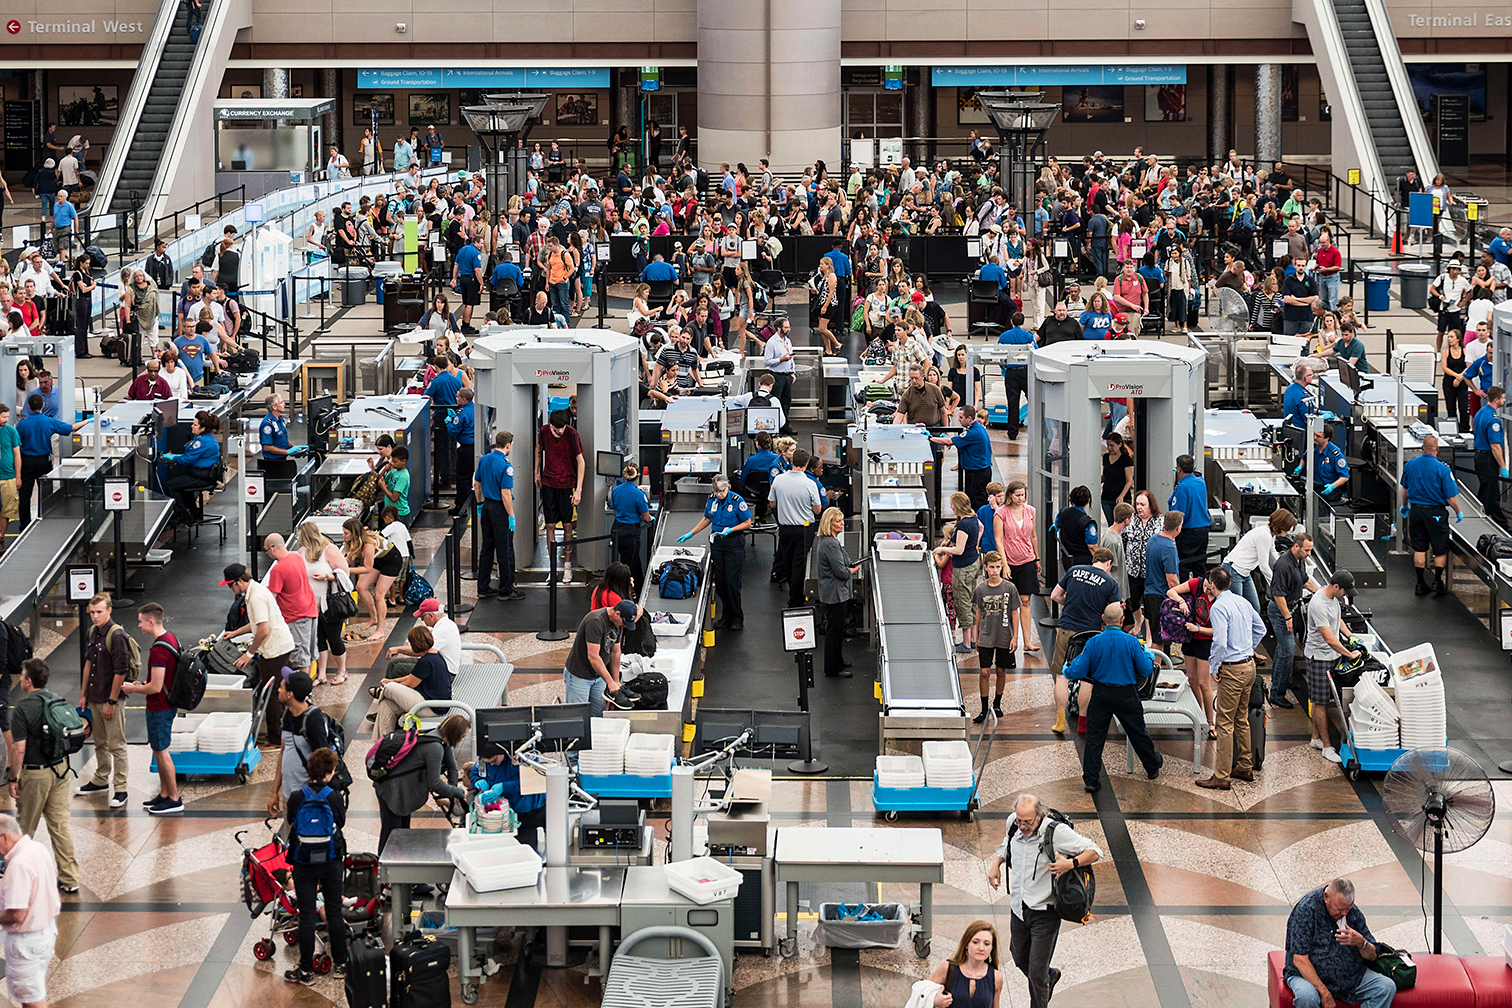 A familiar scene at Denver International Airport's famously congested security corral